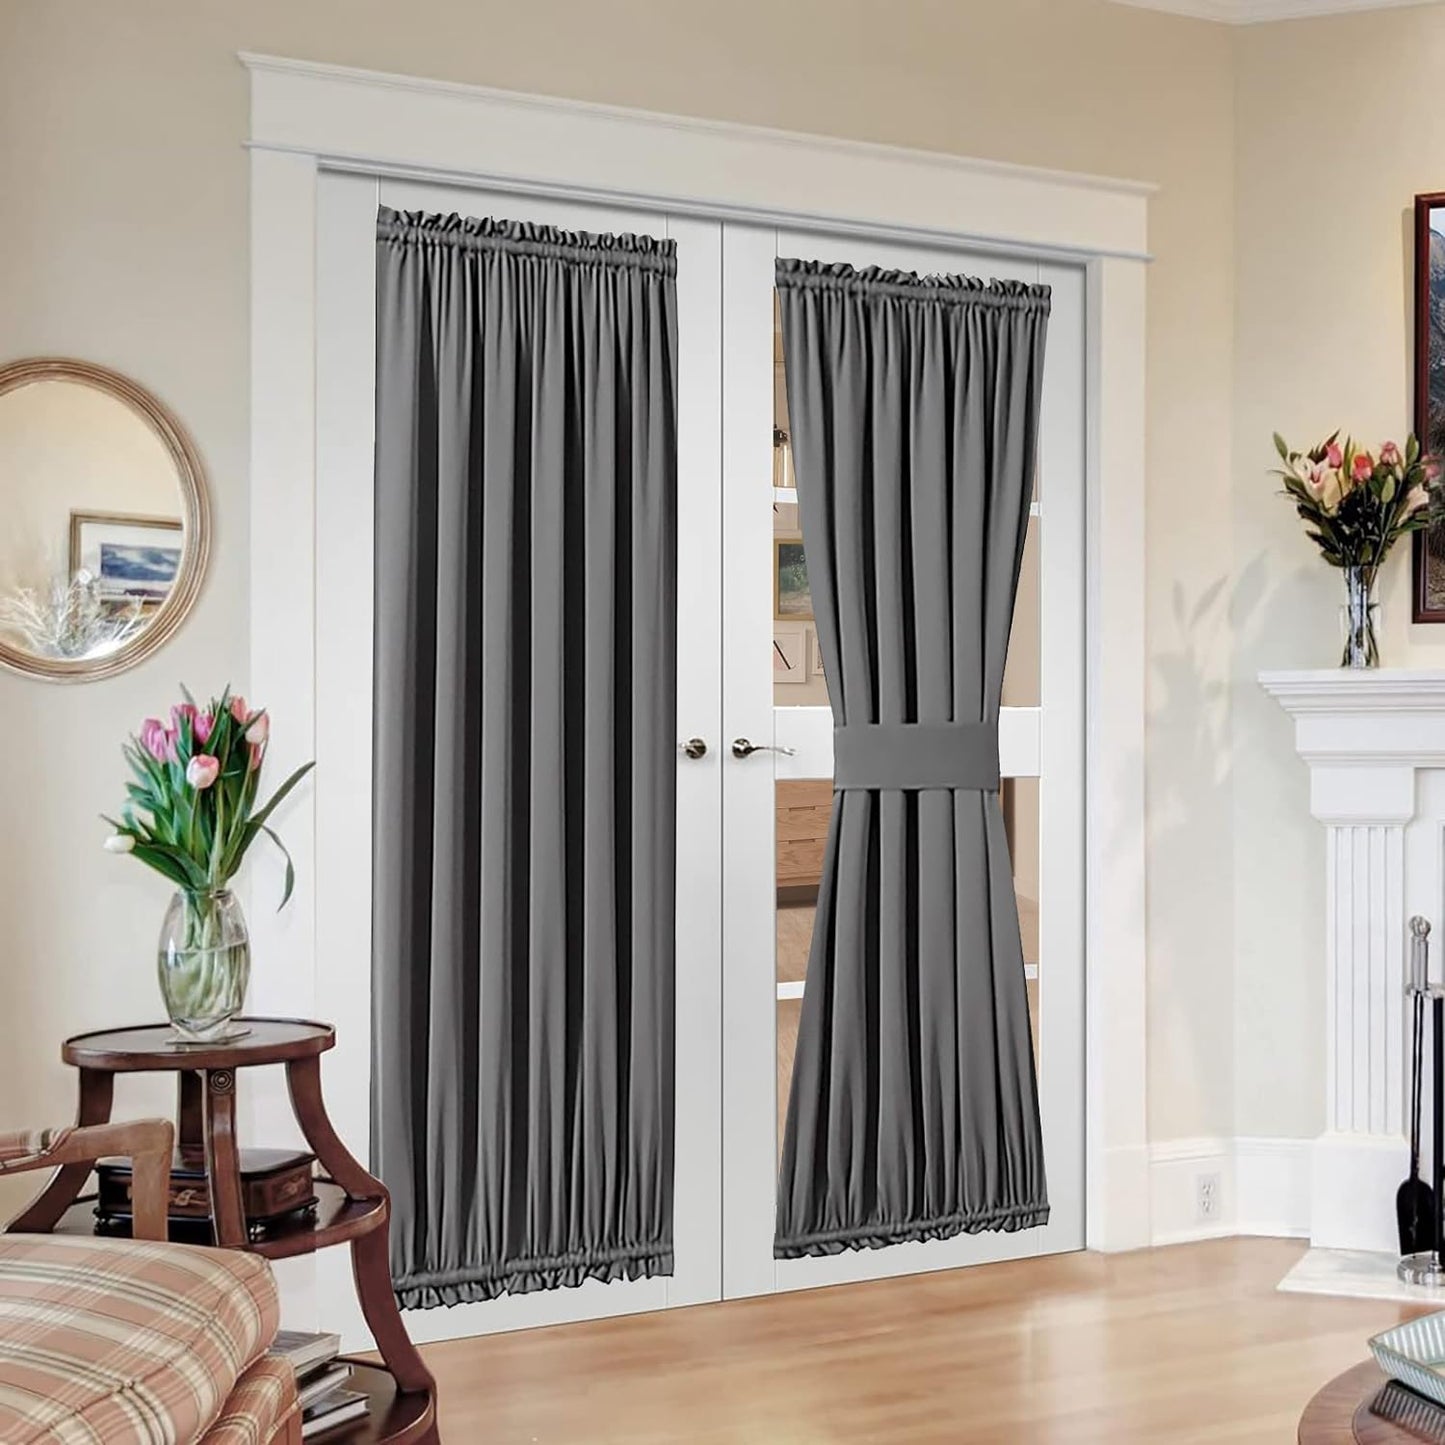 MIULEE Sidelight French Door Blackout Curtain Thermal Insulated Drapes Light Blocking Window Treatment Curtain for Narrow Glass Door Rod Pocket with Tieback 25 Inch by 72 Inch Black 1 Panel  MIULEE Grey 72.00" X 54.00" 